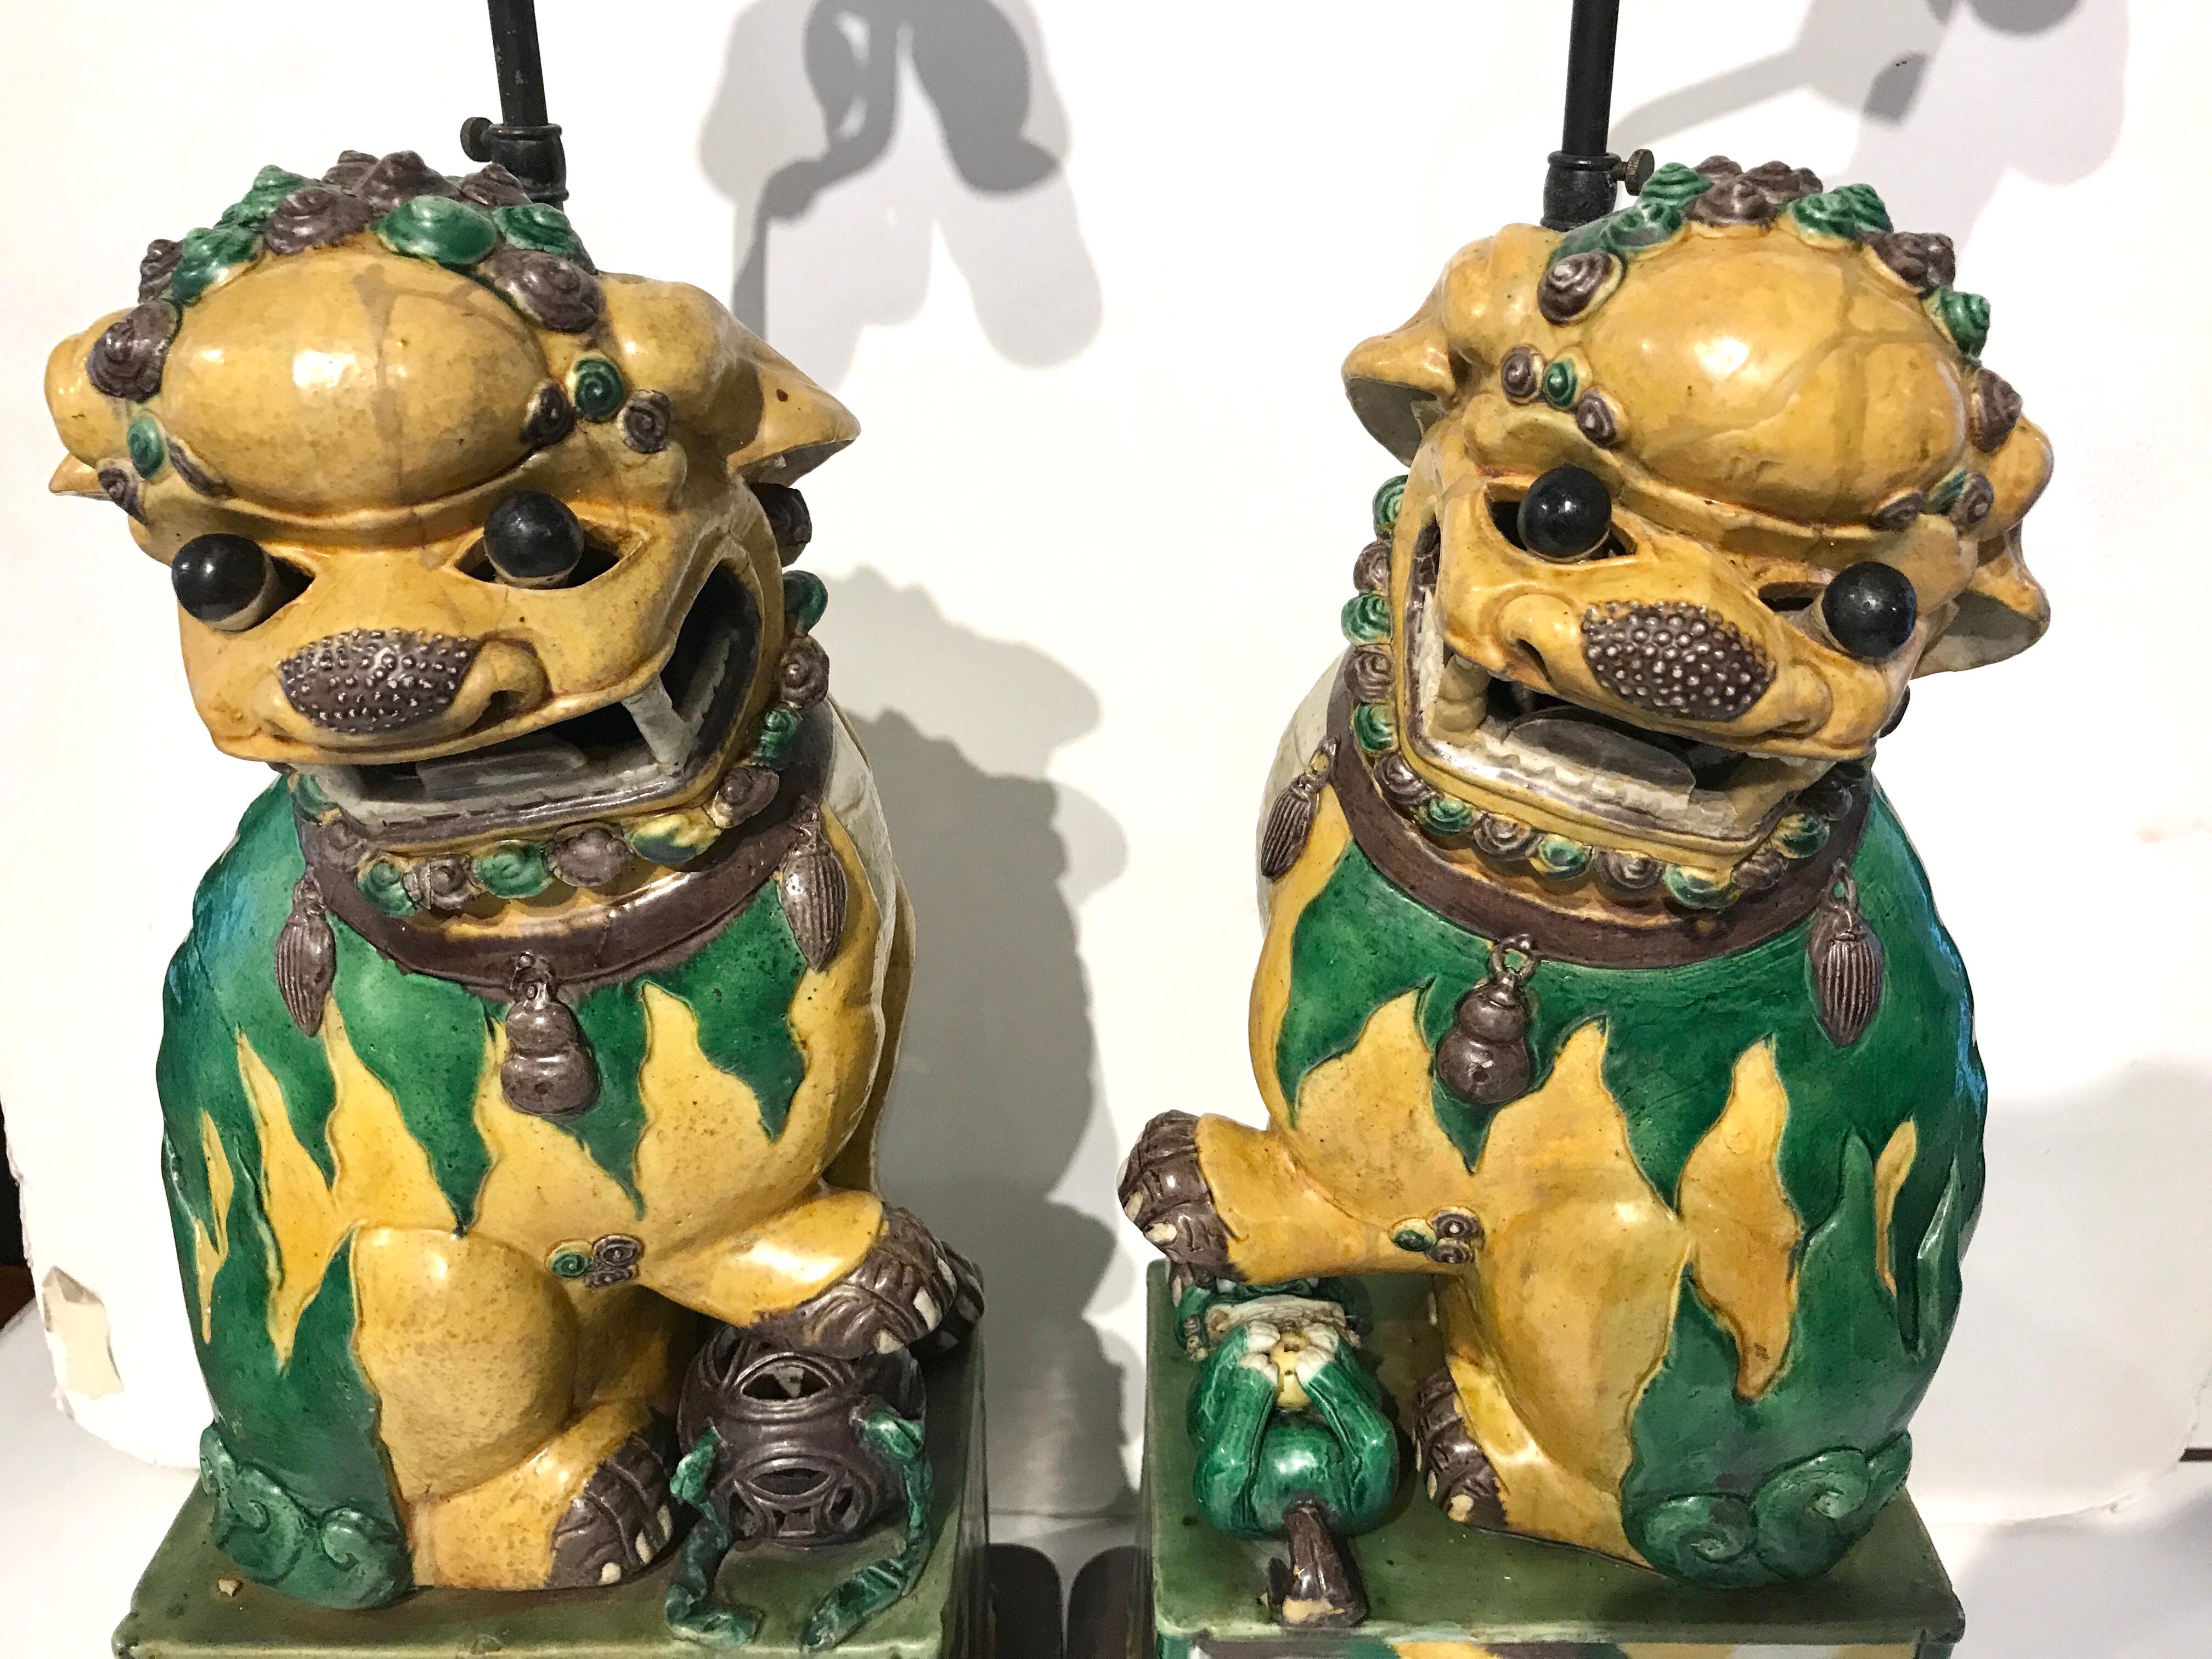 Pair of large antique Sancai Chinese export foo dogs, now as lamps
As lamps they stand 31